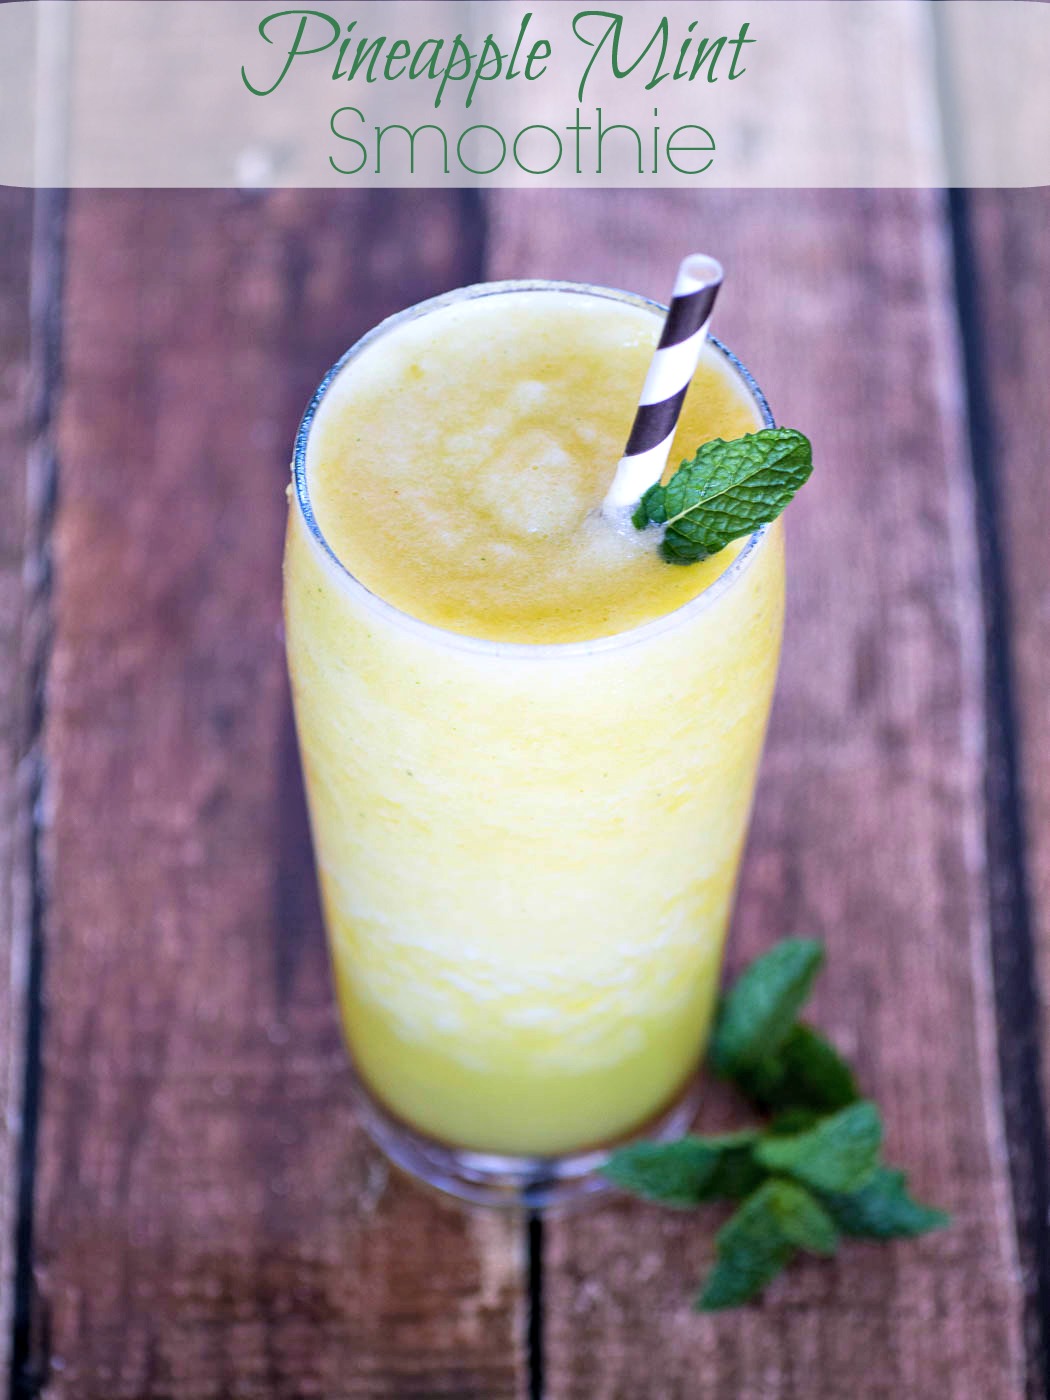 Pineapple Mint Smoothie - an easy smoothie made of pineapple, mint and ice - perfect for warm summer days